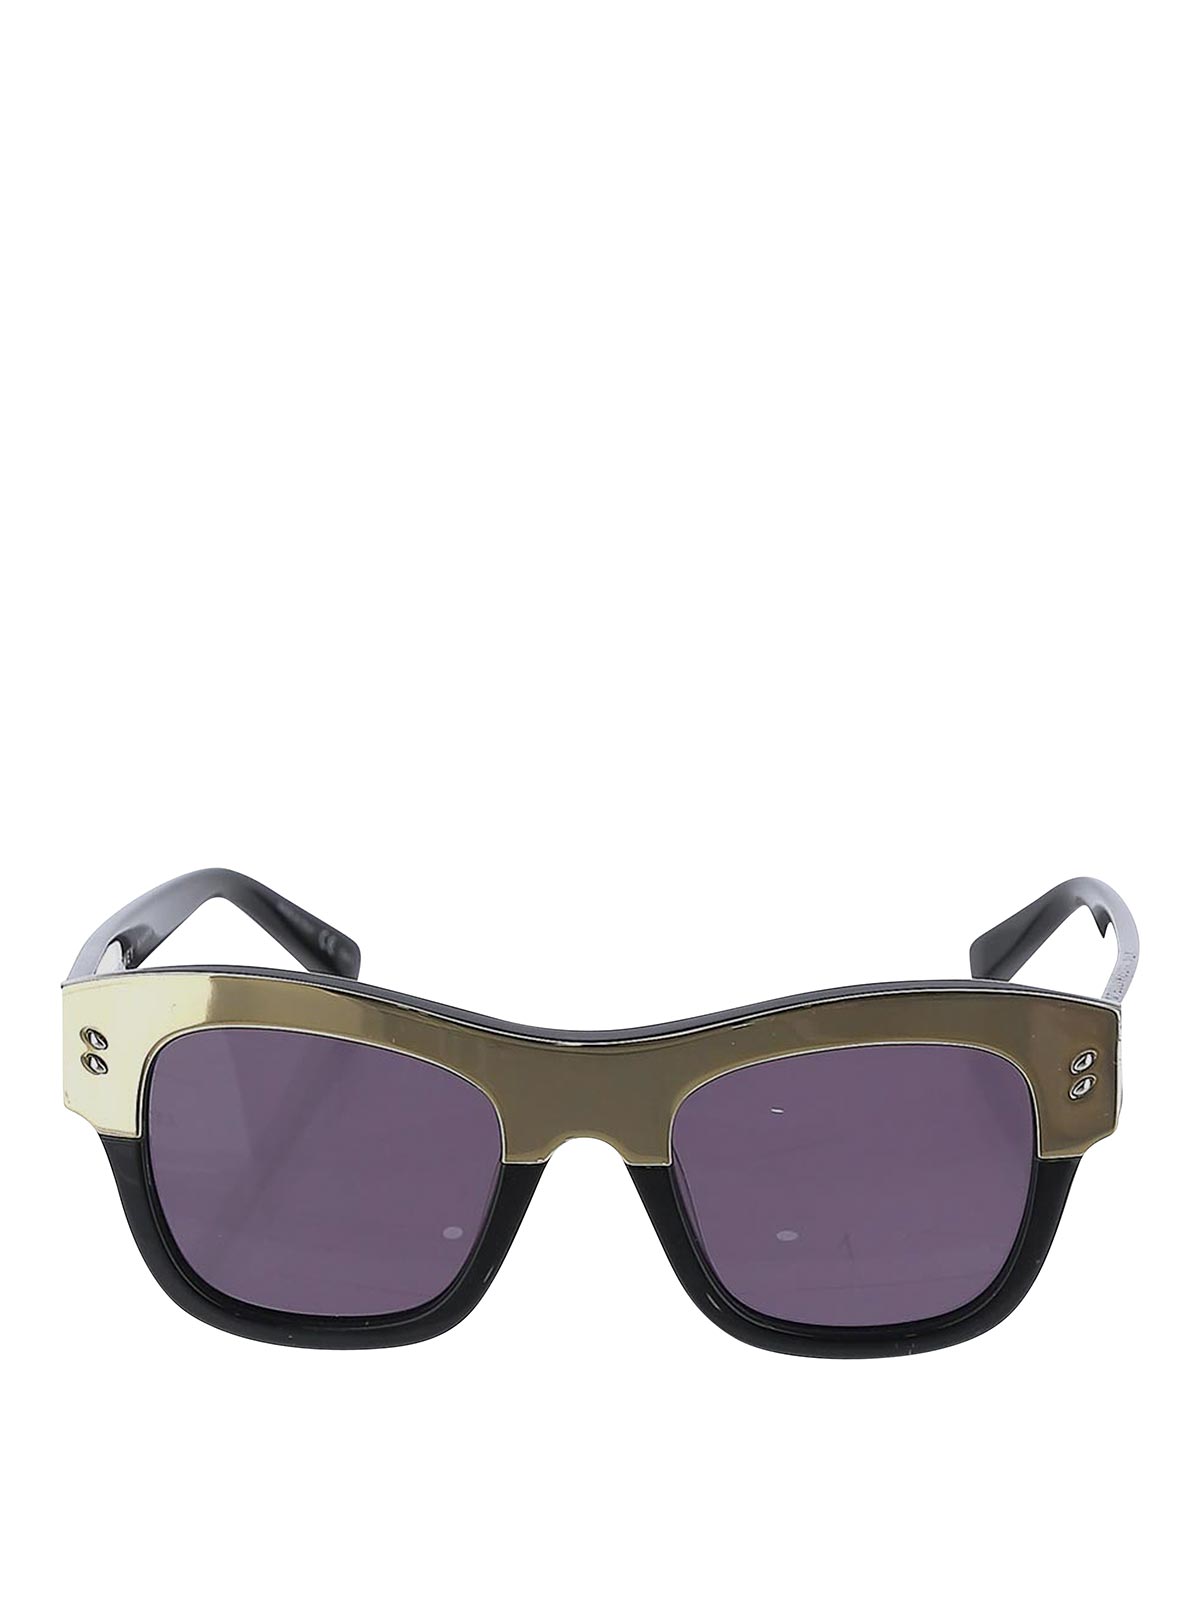 Stella Mccartney Sunglasses In Black With On The Frame In Green